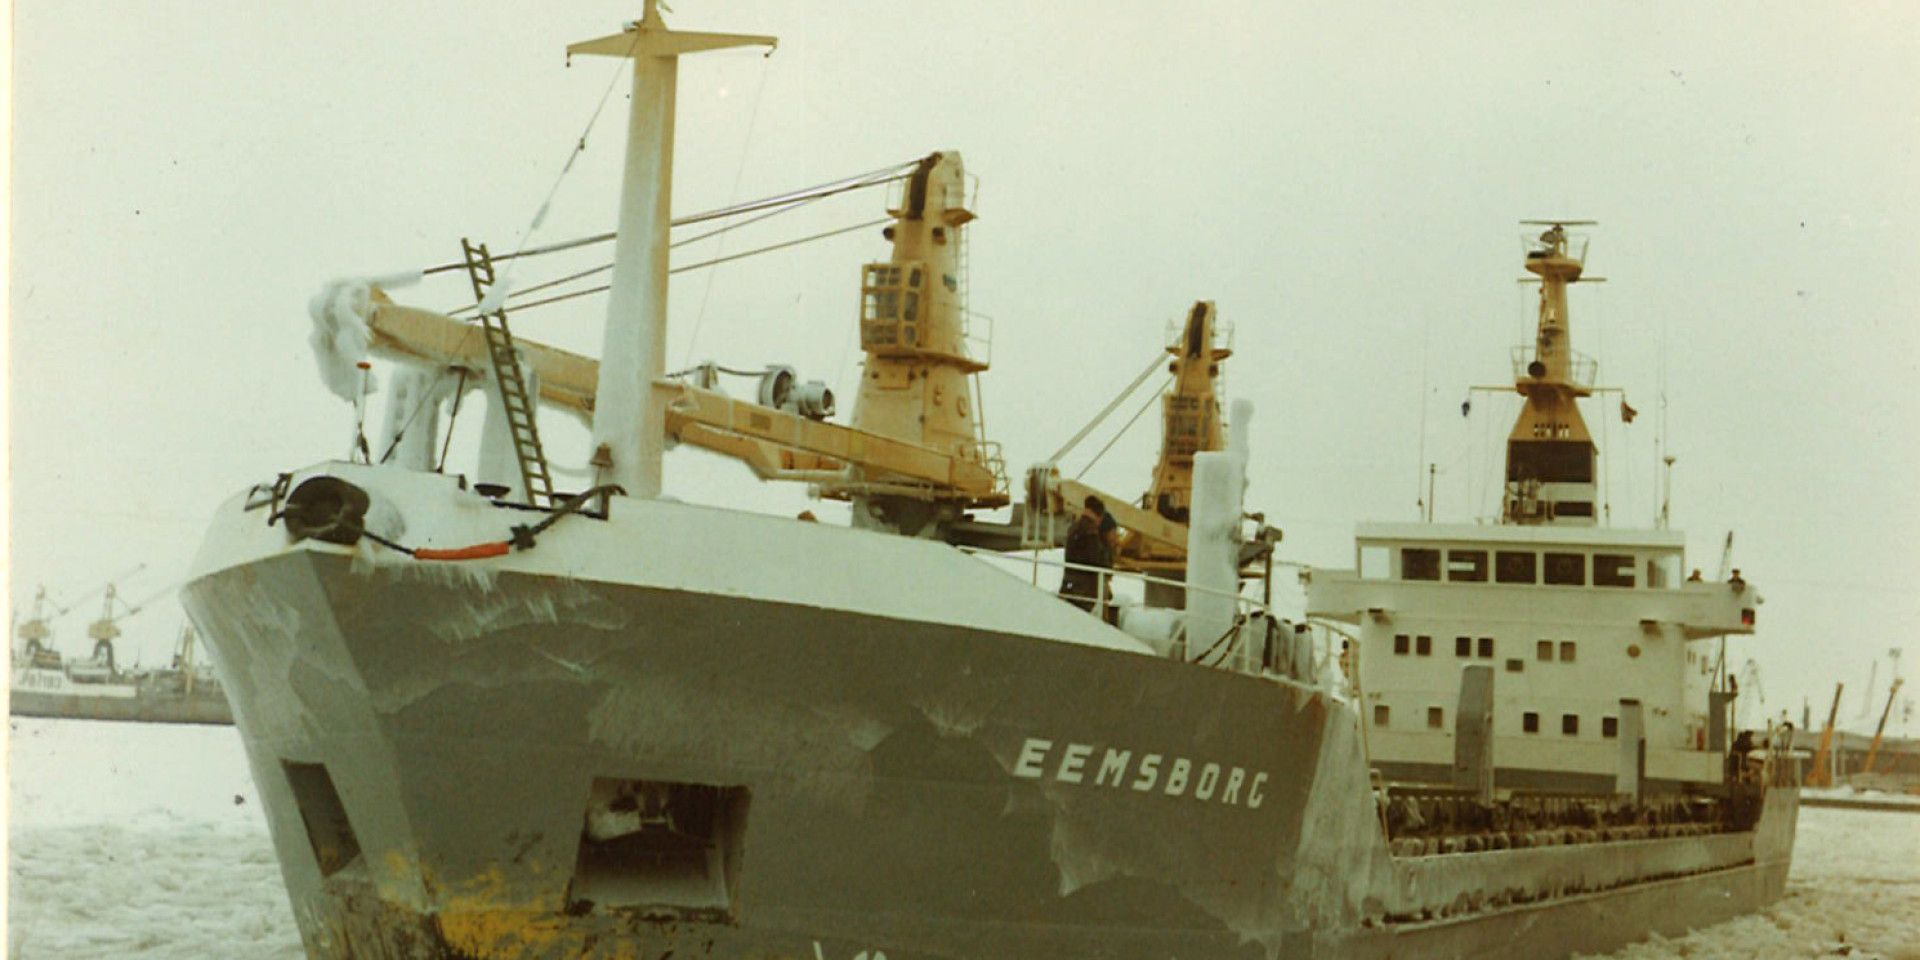 The Eemsborg, first vessel of our client Erik Thun